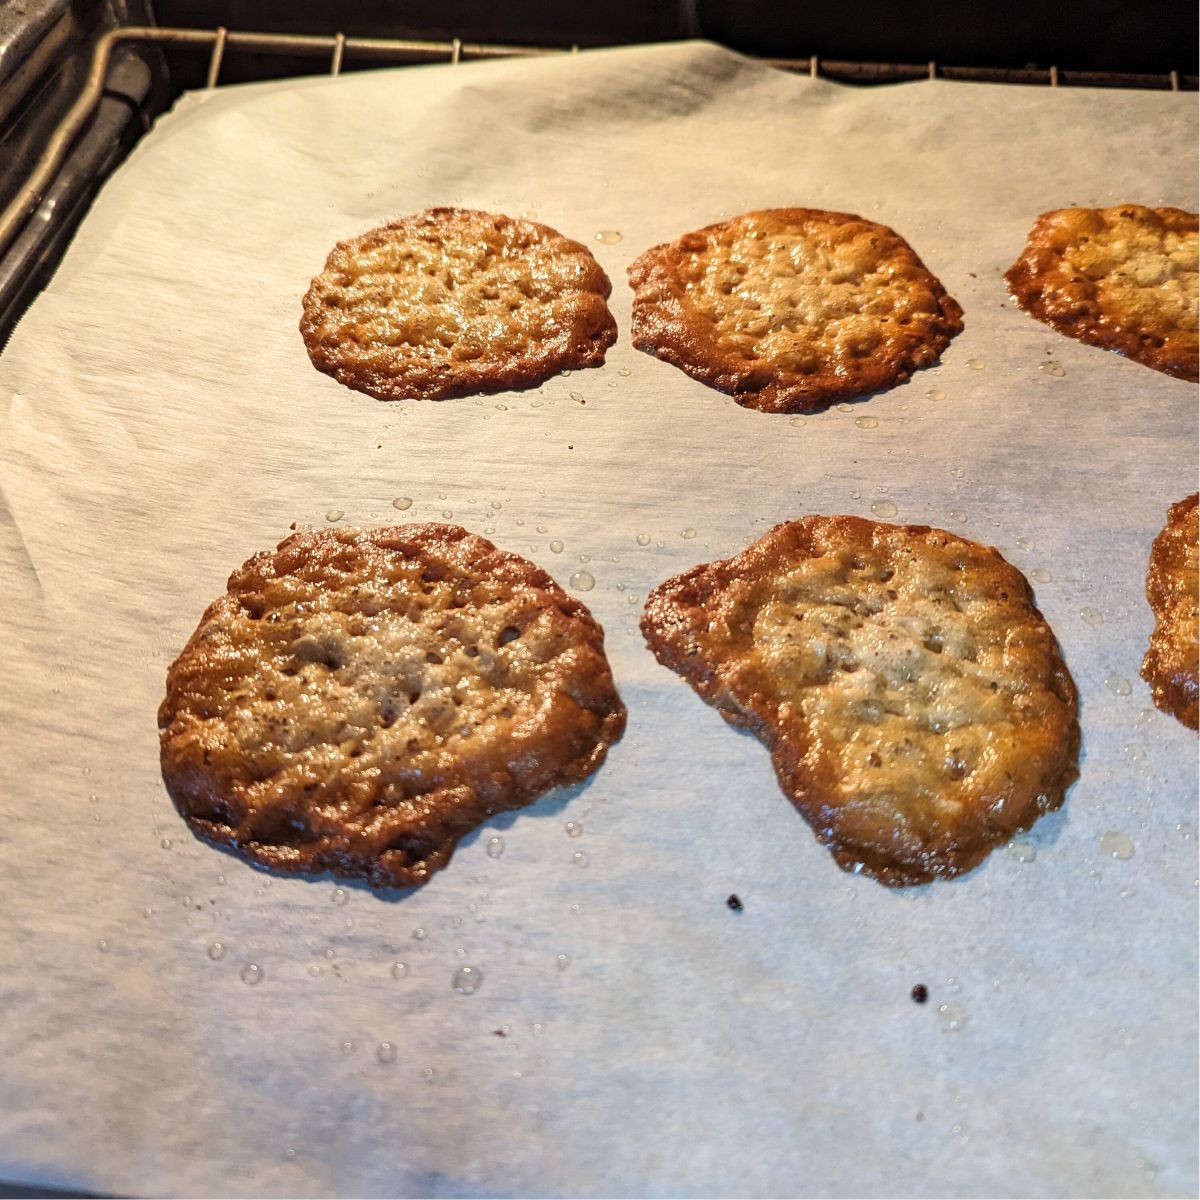 A tray of coconut oatmeal lace cookies on a baking sheet in the oven.